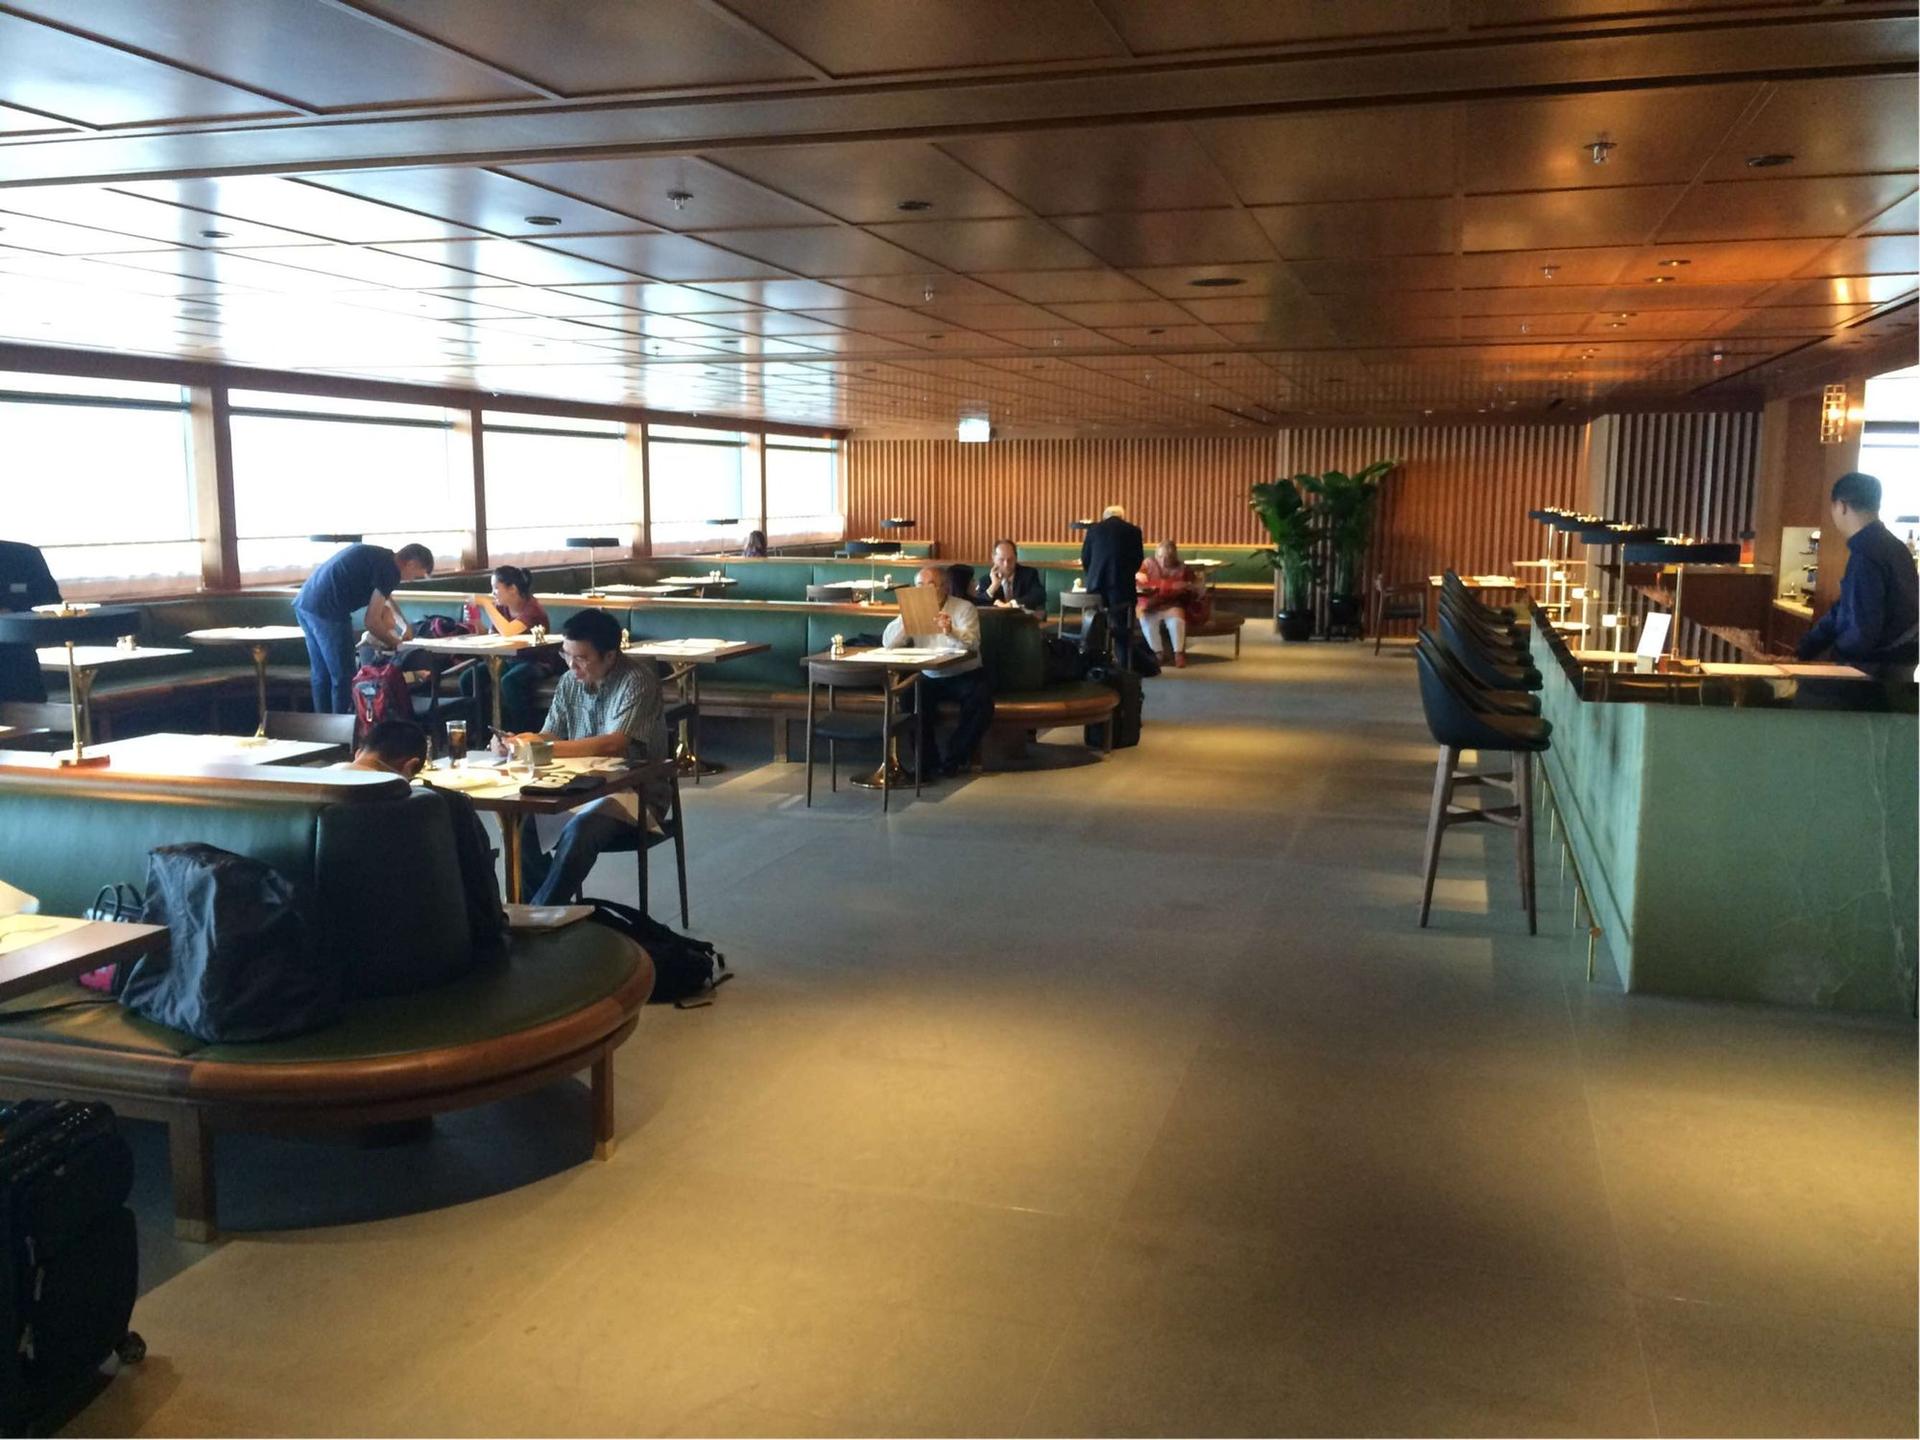 Cathay Pacific The Pier First Class Lounge image 30 of 100